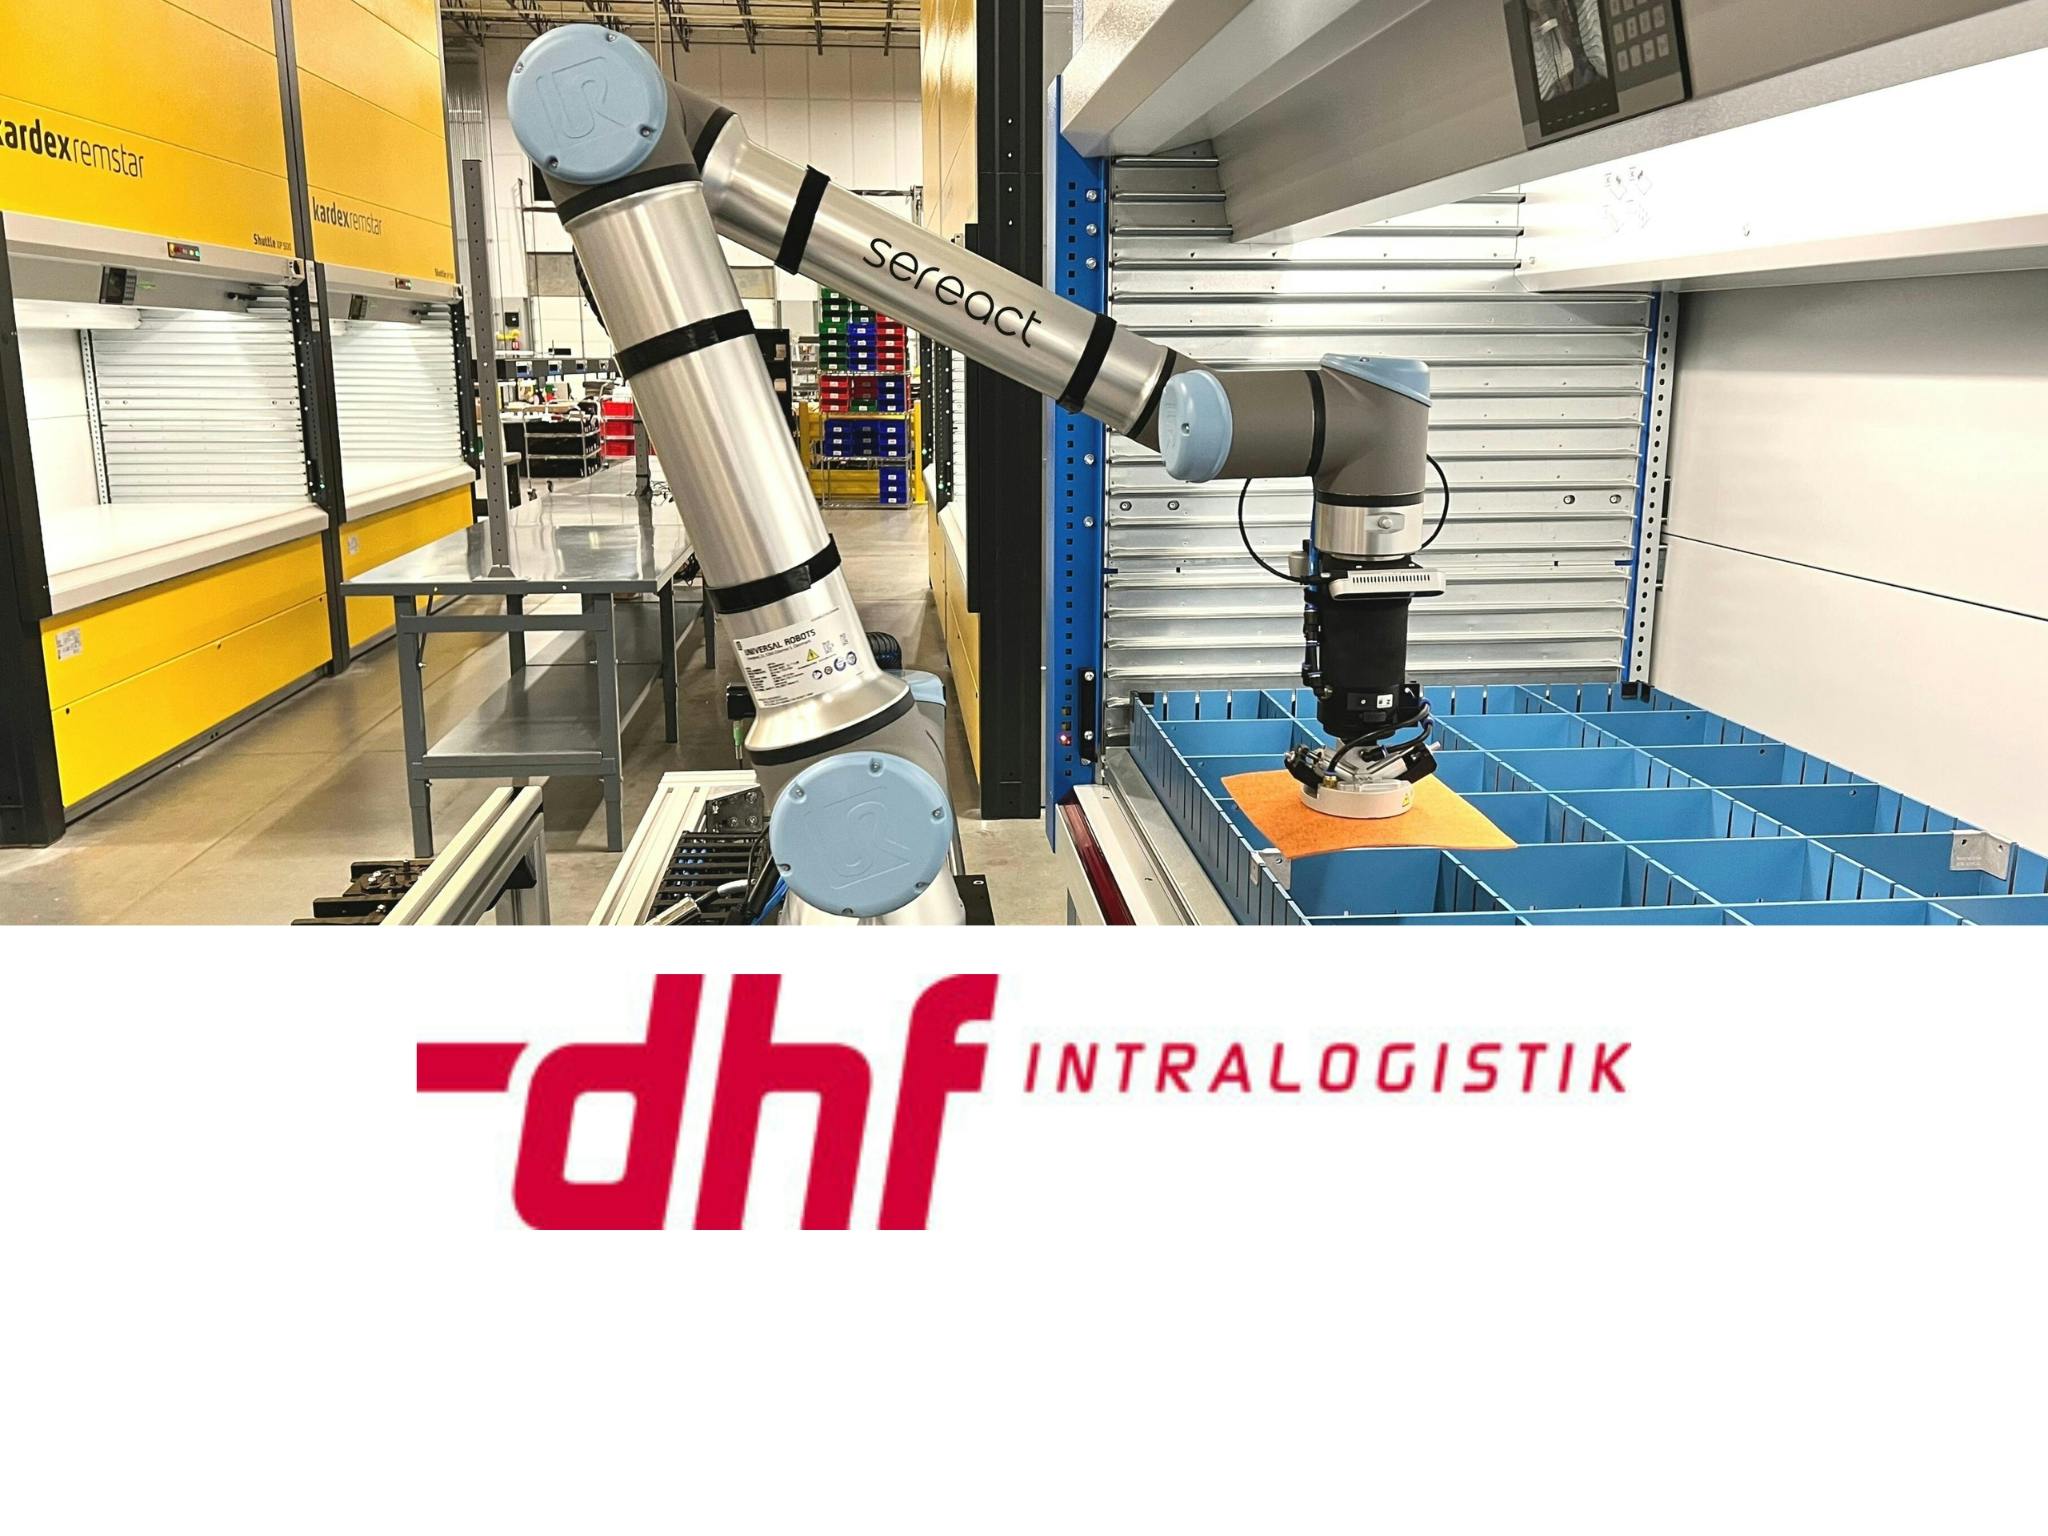 Sereact in dhf intralogistics magazine